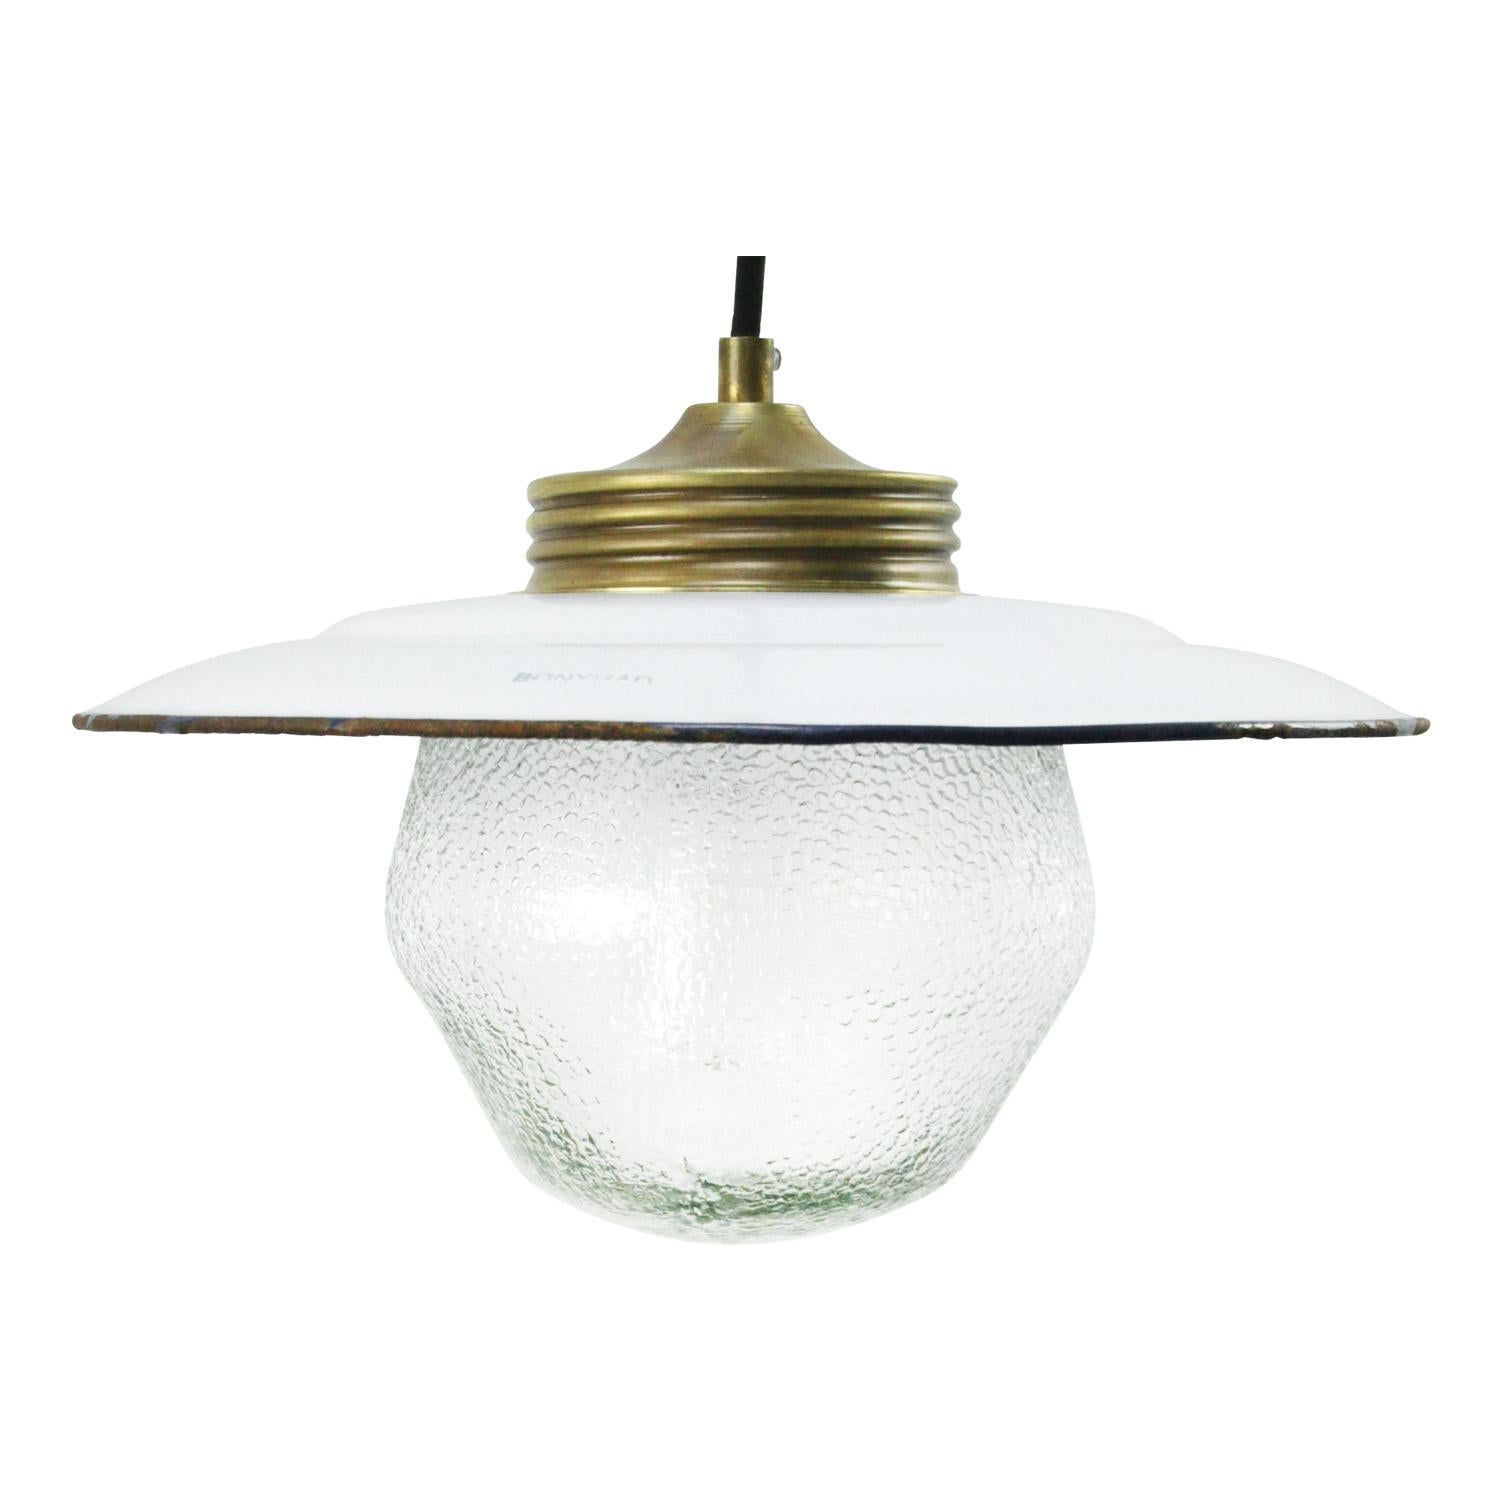 White enamel Industrial hanging lamp.
Frosted glass with brass top.

Weight: 2.40 kg / 5.3 lb

Priced per individual item. All lamps have been made suitable by international standards for incandescent light bulbs, energy-efficient and LED bulbs.